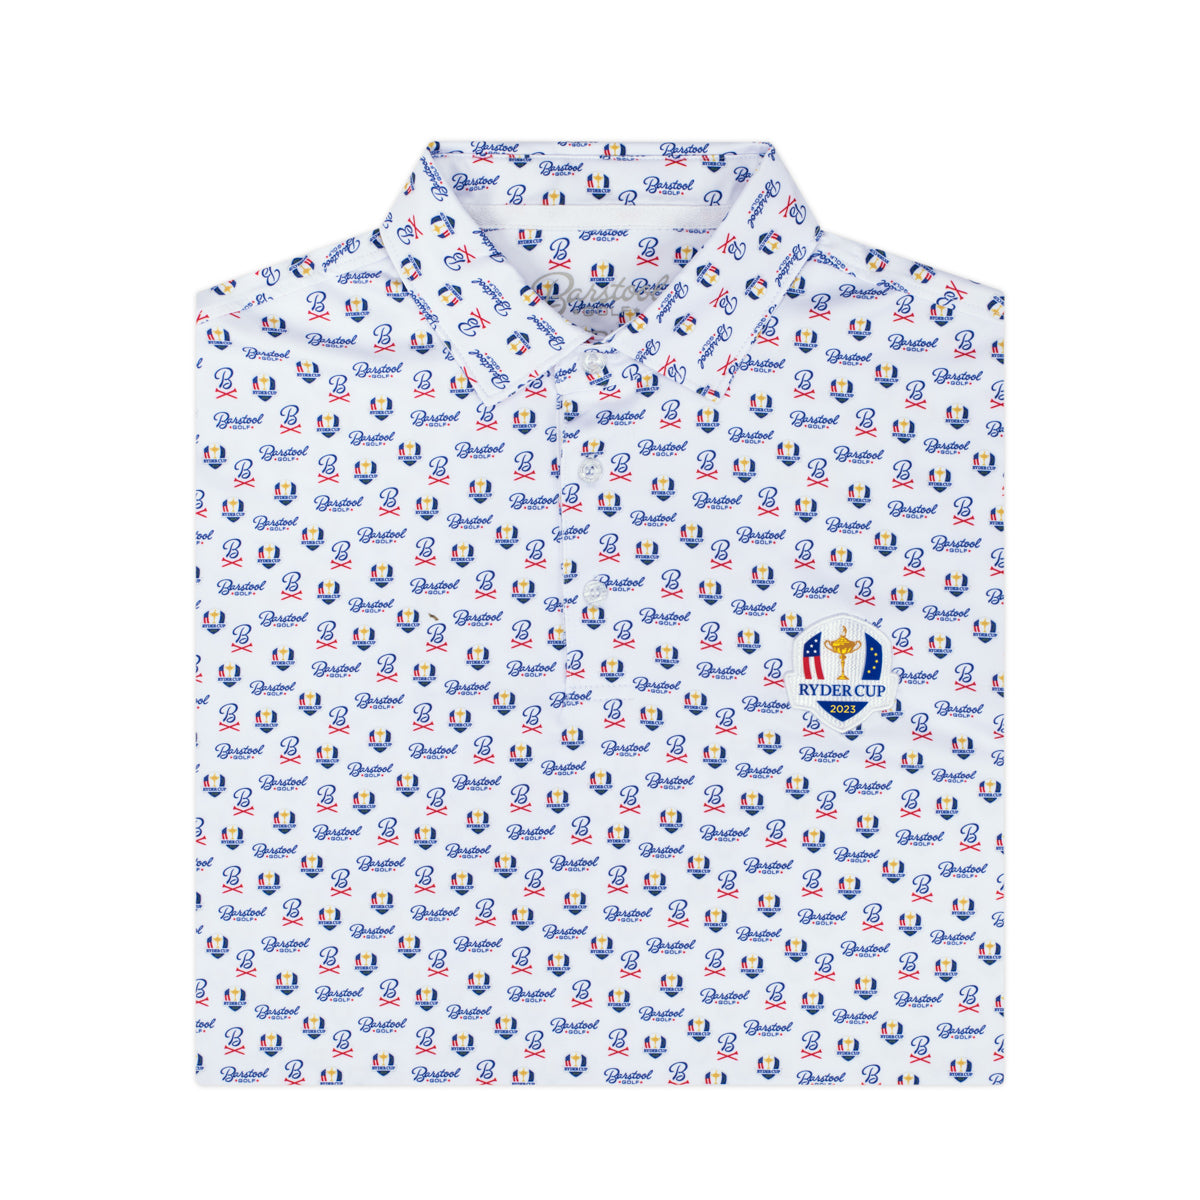 Barstool Golf x Ryder Cup Printed Polo-Polos-Fore Play-White-S-Barstool Sports